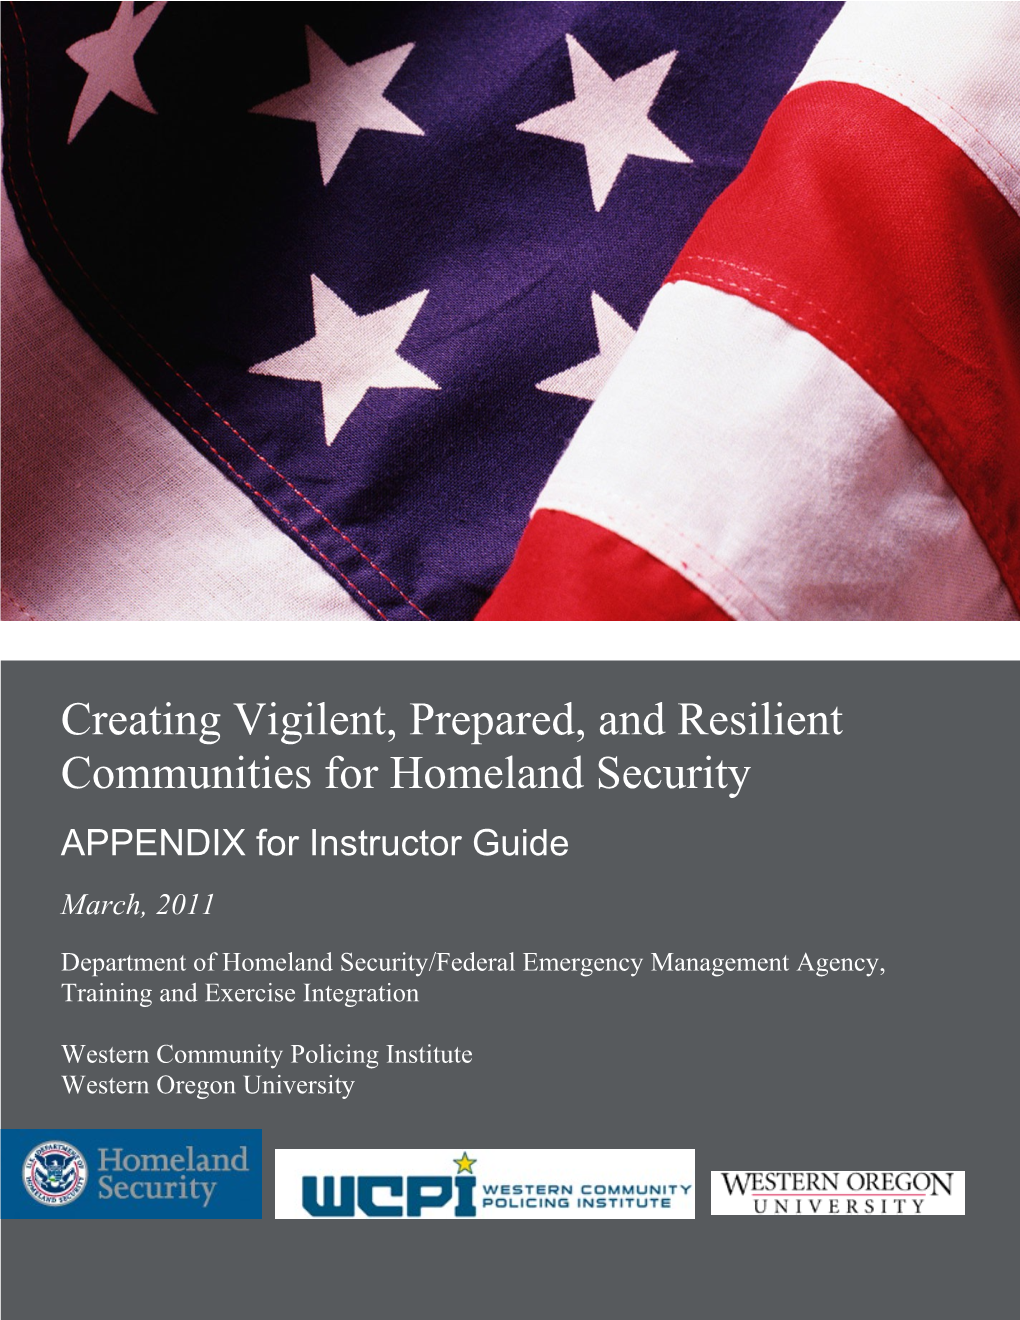 Creating Vigilent, Prepared, and Resilient Communities for Homeland Security